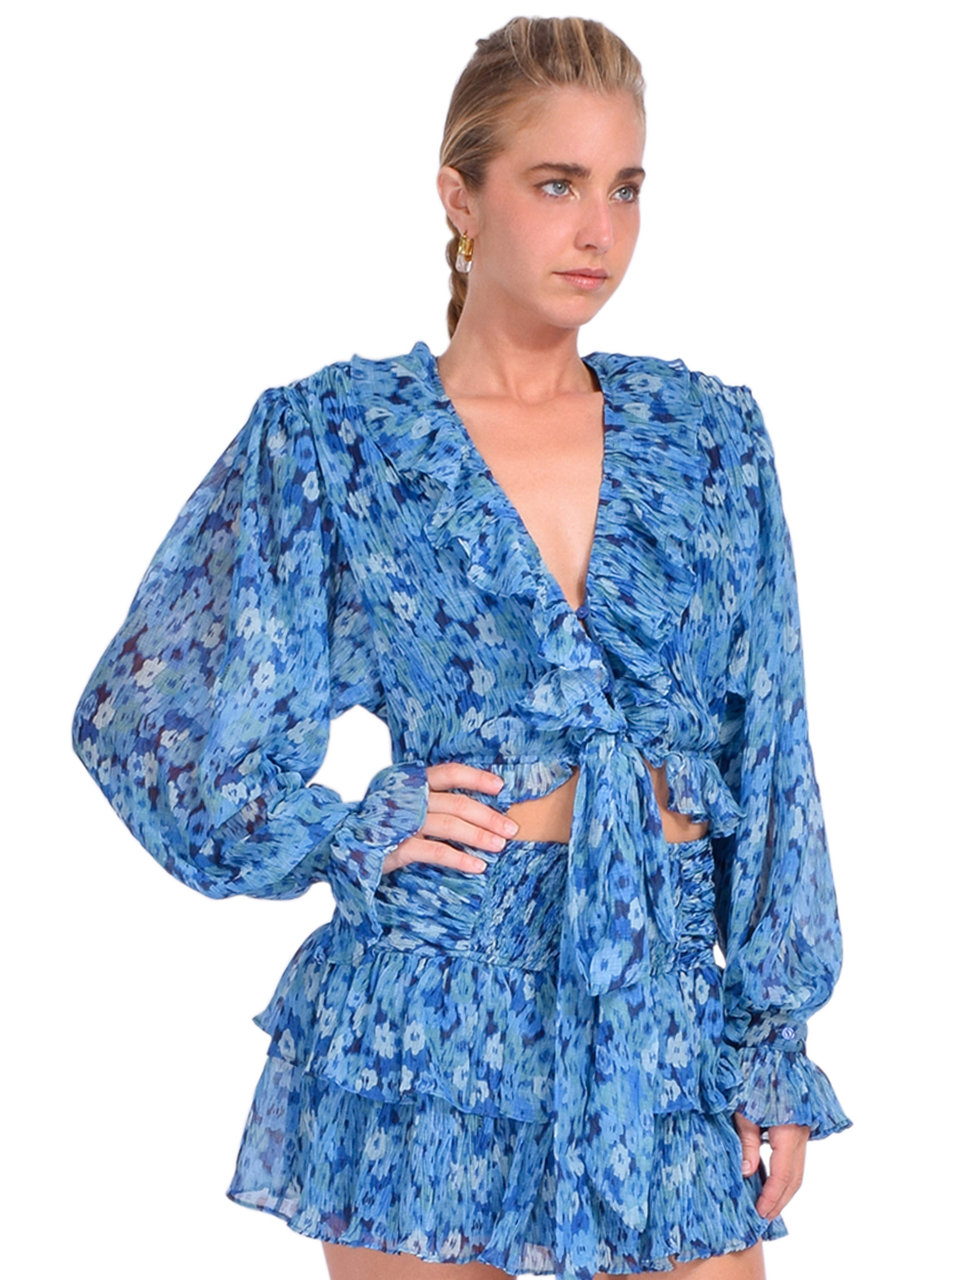 SABINA MUSAYEV Stephen Top in Turquoise Print Side View 

